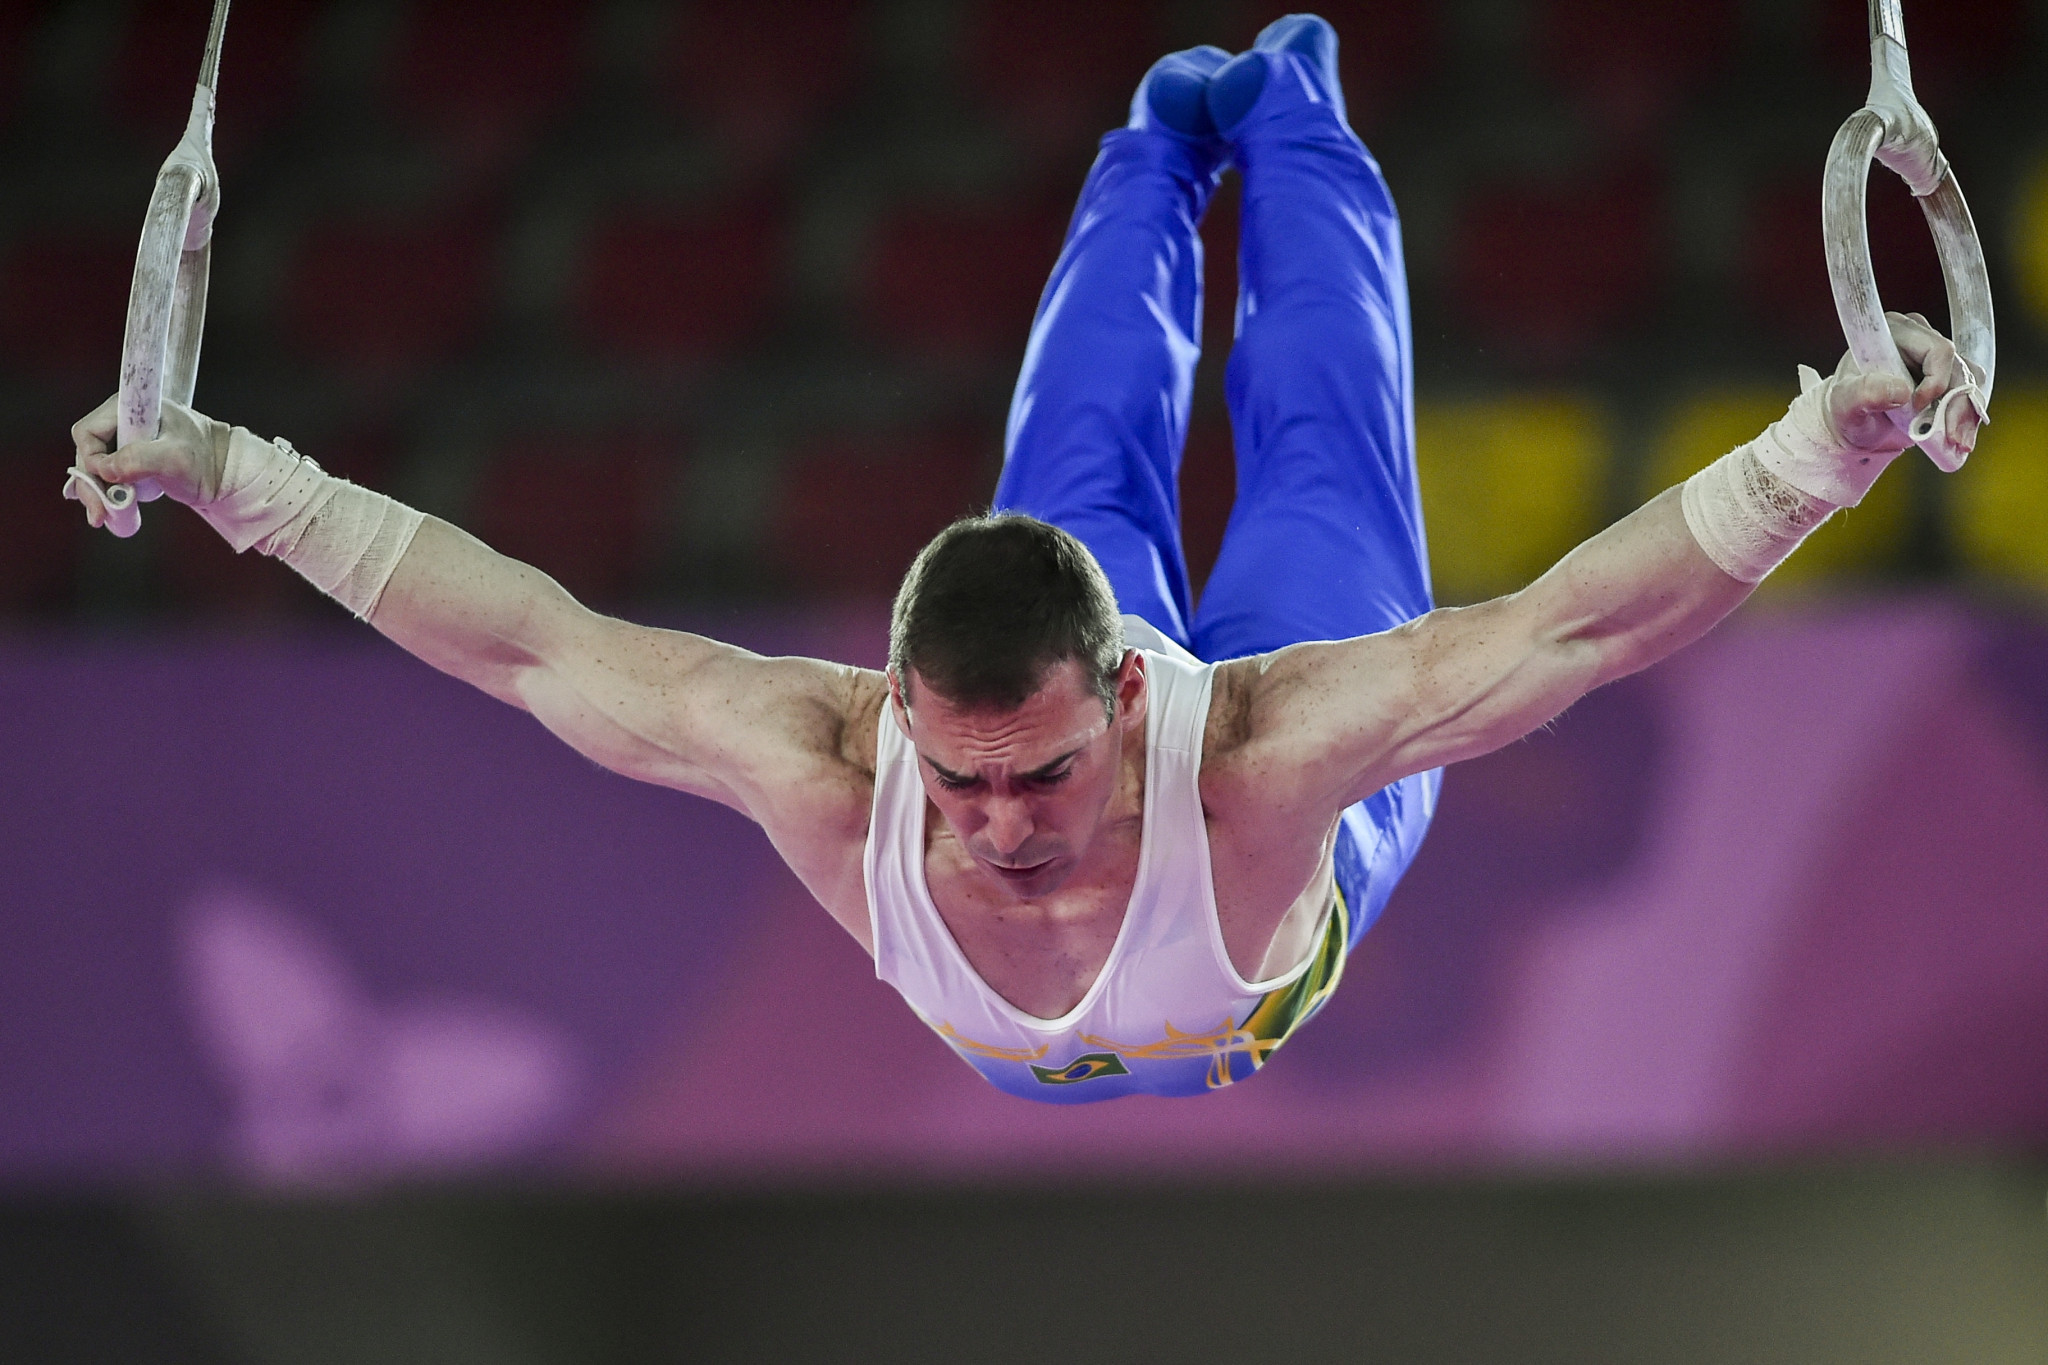 London 2012 Olympic champion Arthur Zanetti played a key role as Brazil won the men's team gymnastics event ©Getty Images